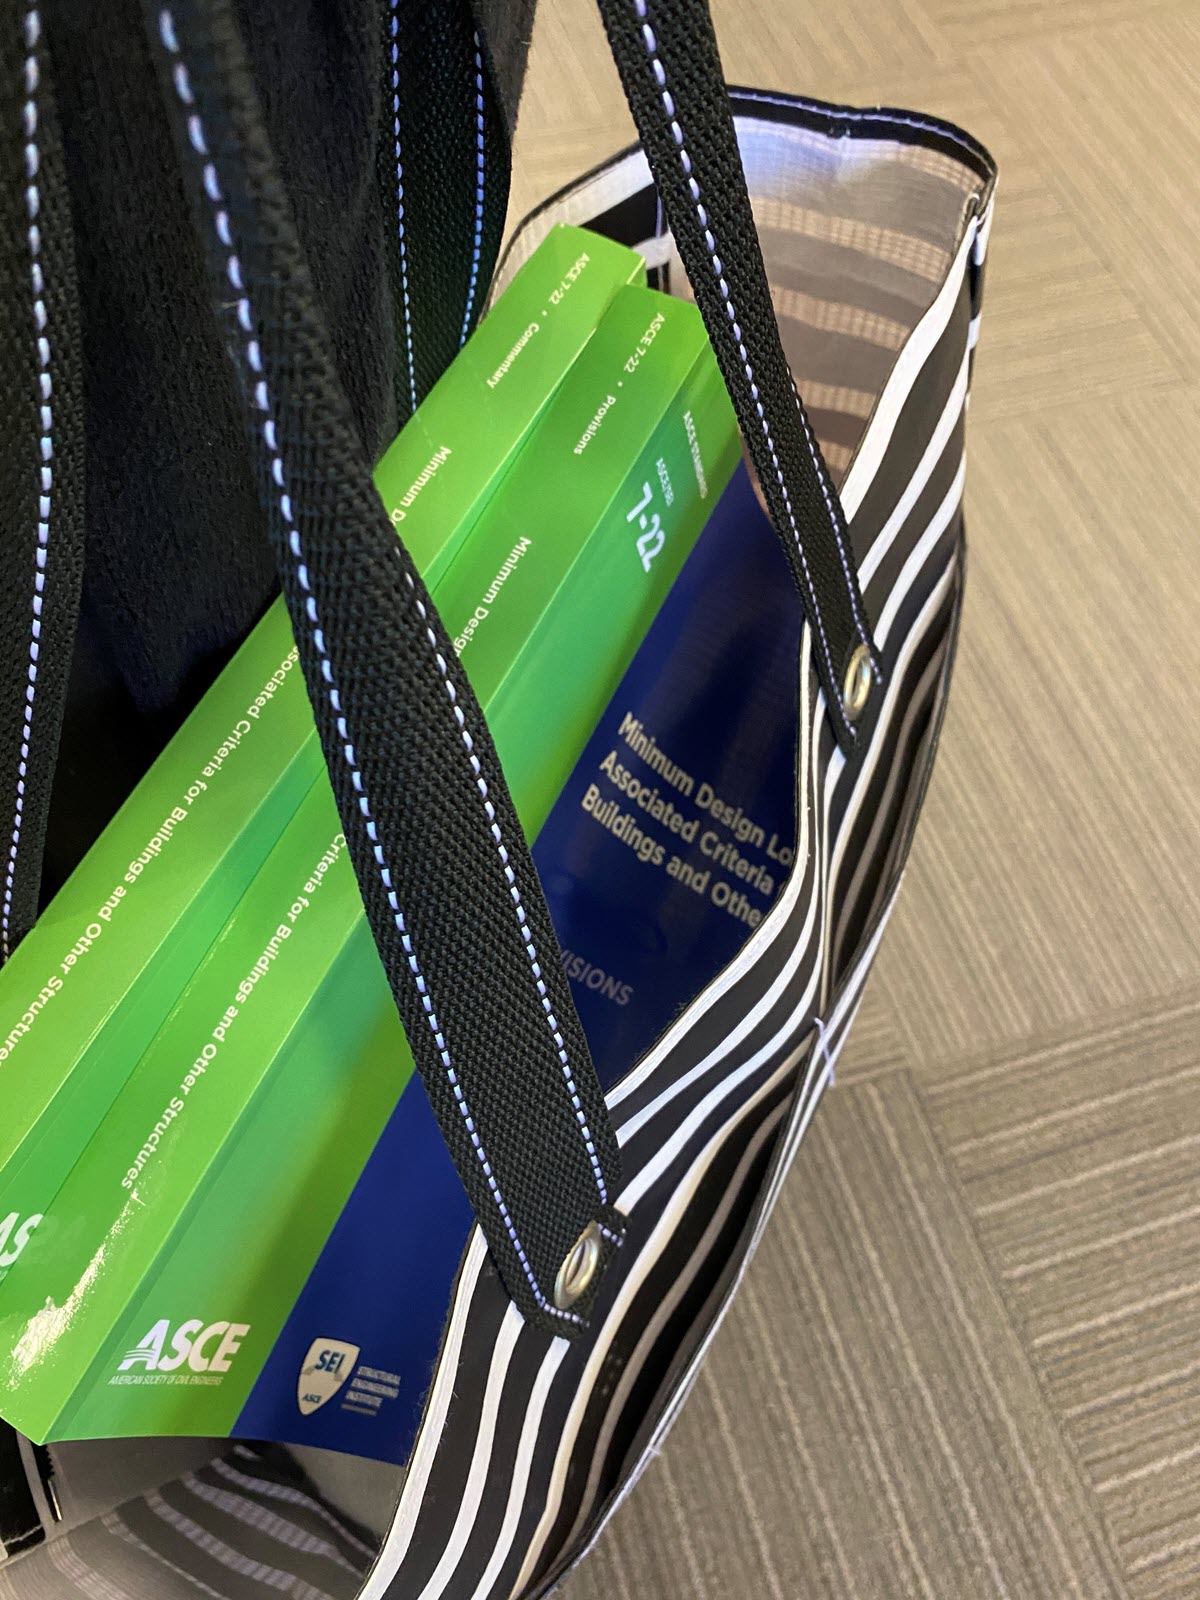 photo of ASCE 7 in a bag